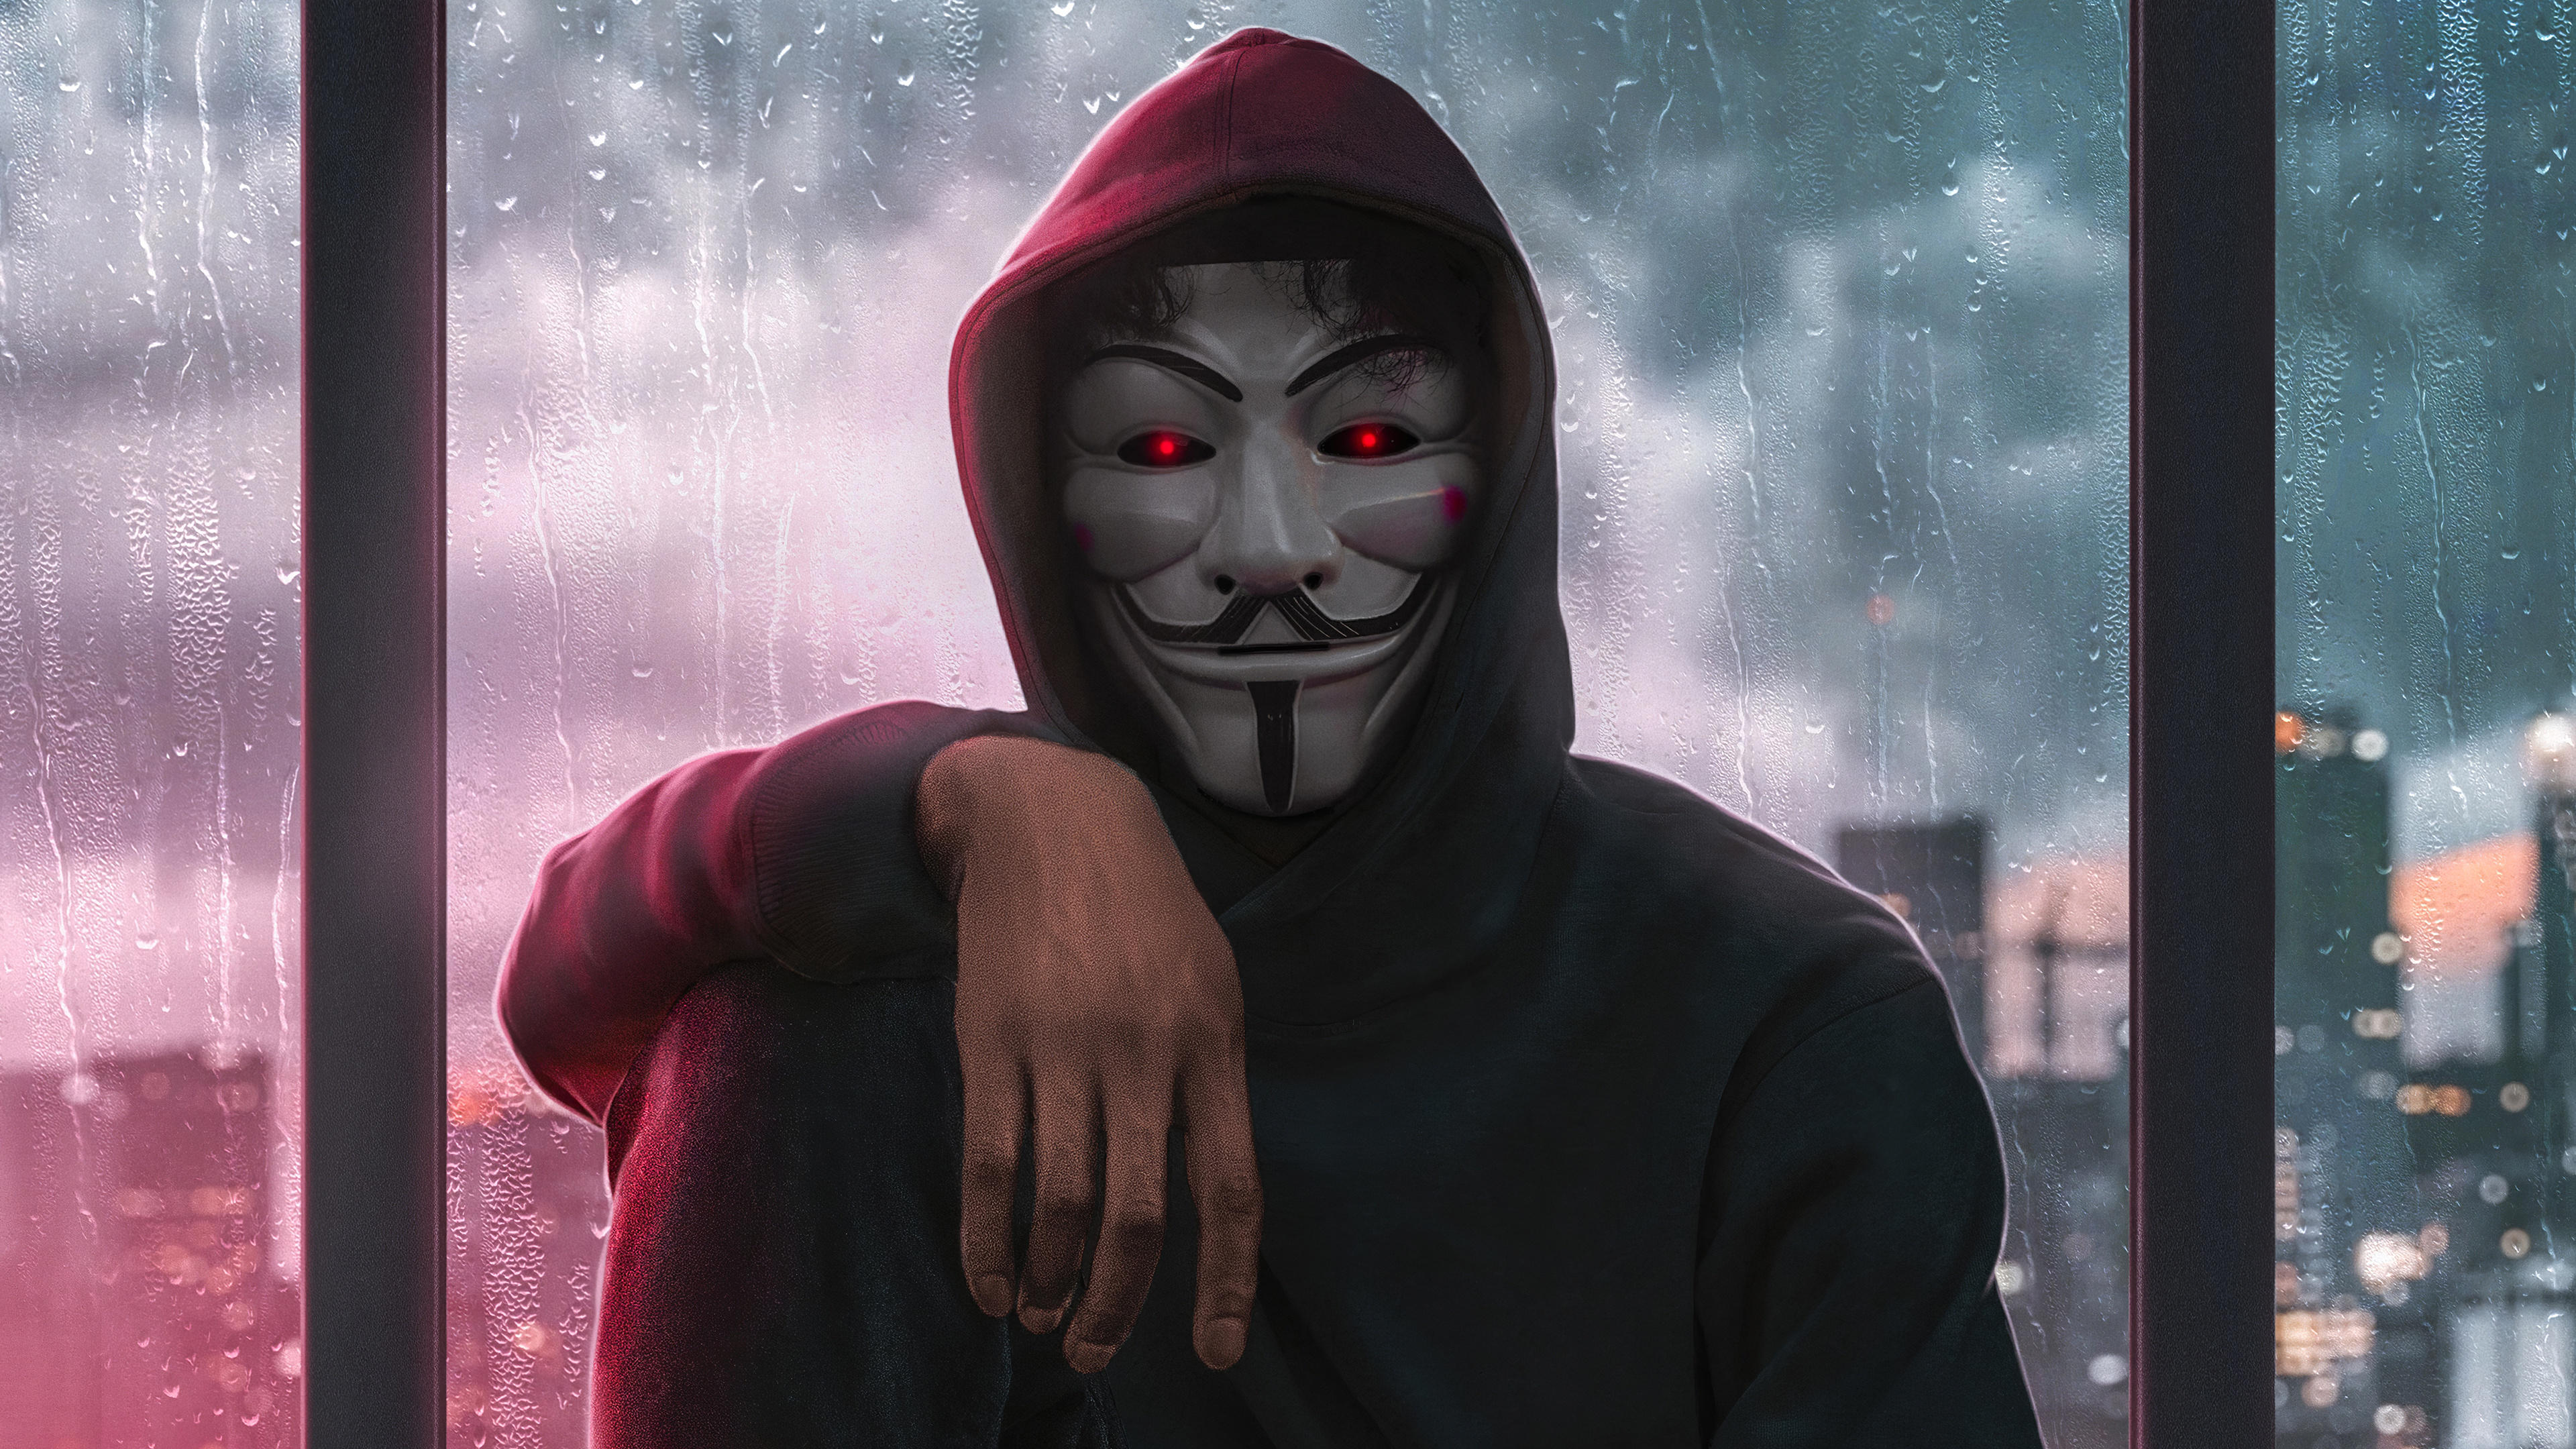 Guy Fawkes Mask: Anonymous, movement primarily known for its various cyberattacks against several governments. 3840x2160 4K Background.